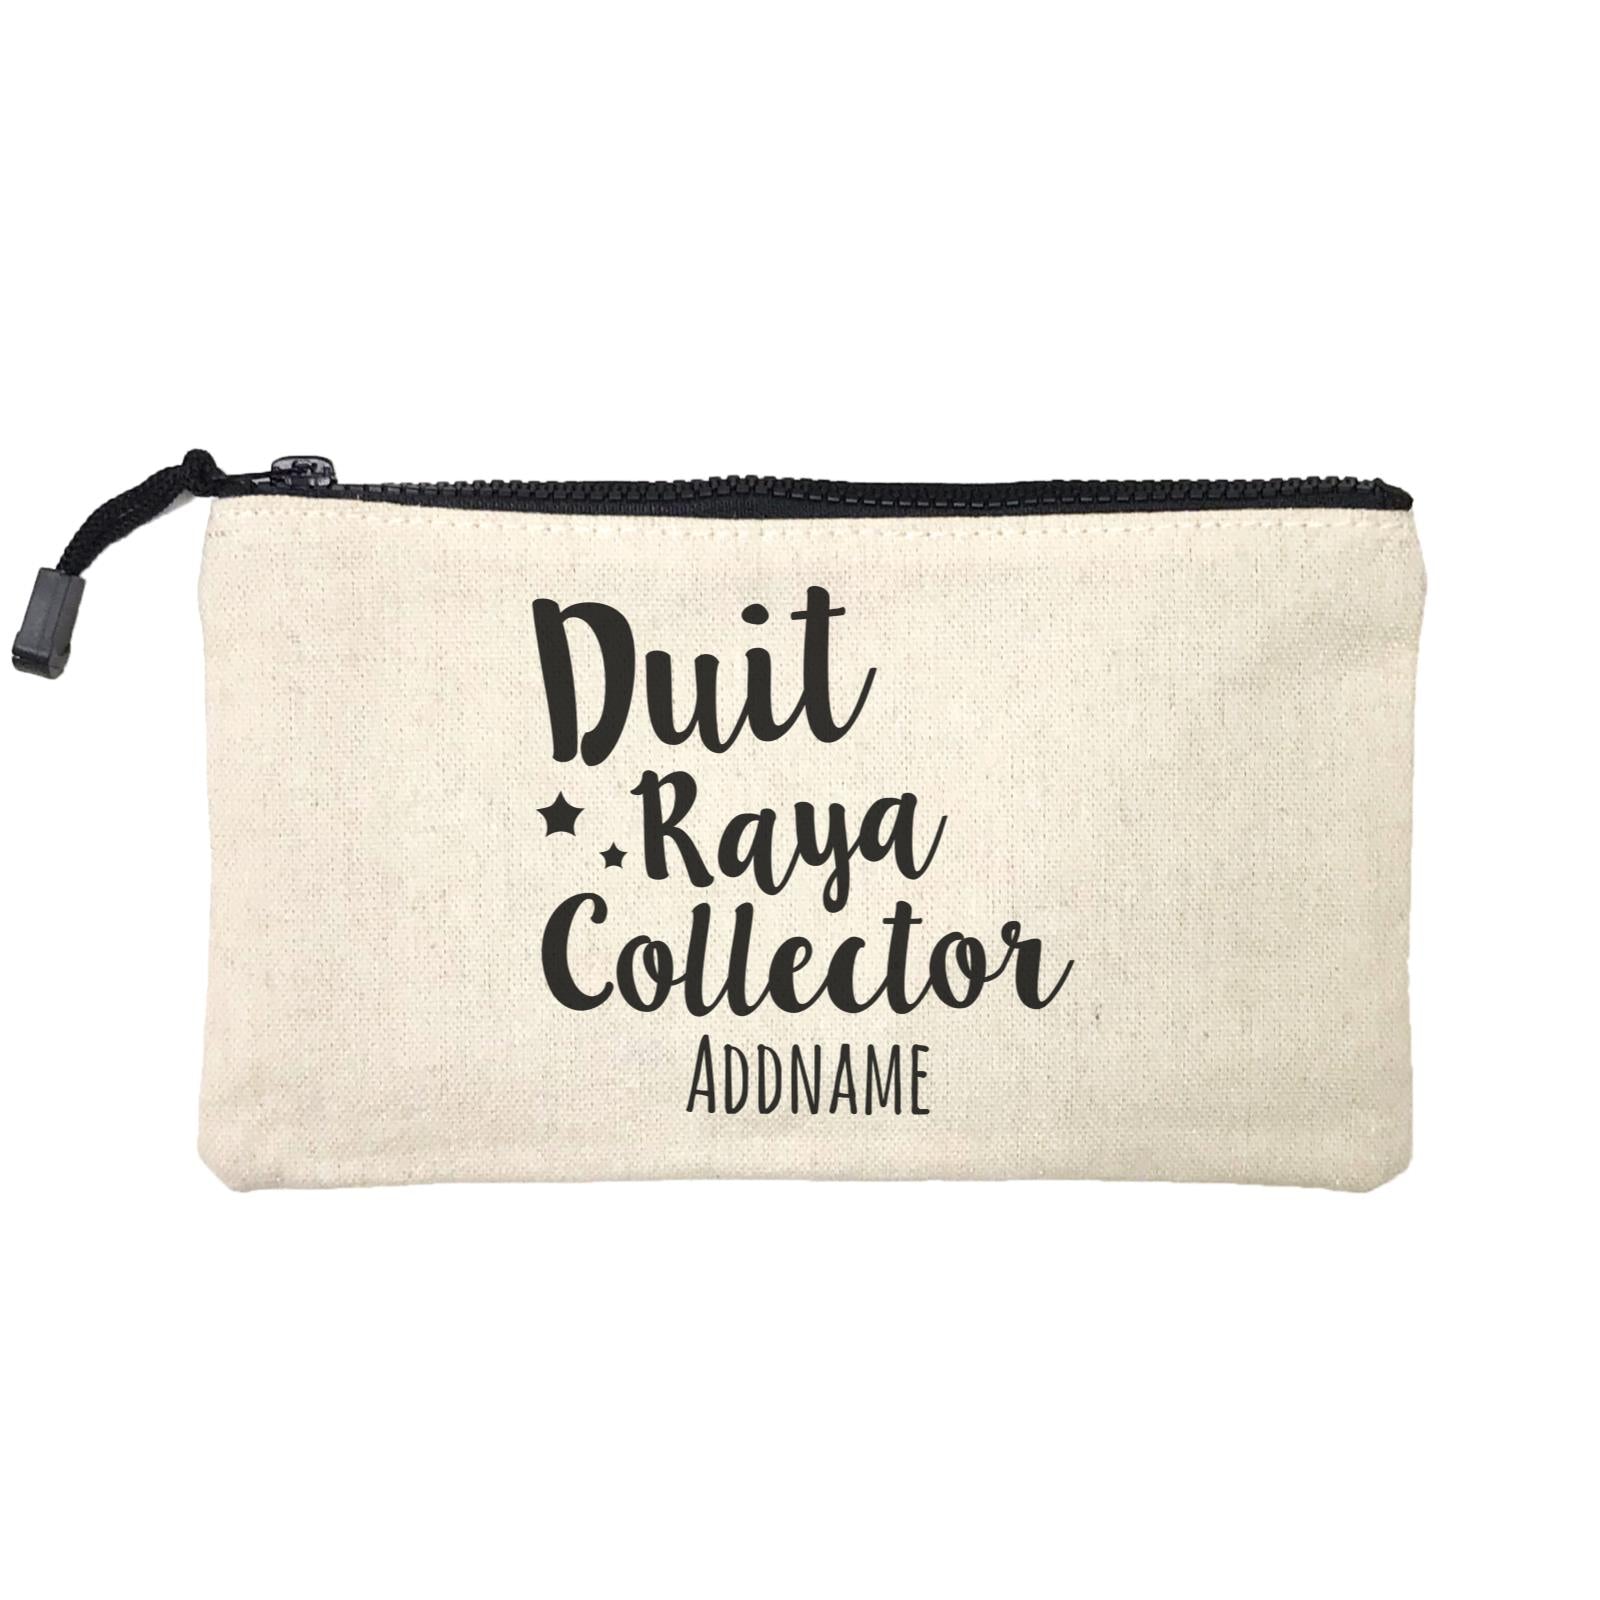 Duit Raya Collector Addname Mini Accessories Stationery Pouch